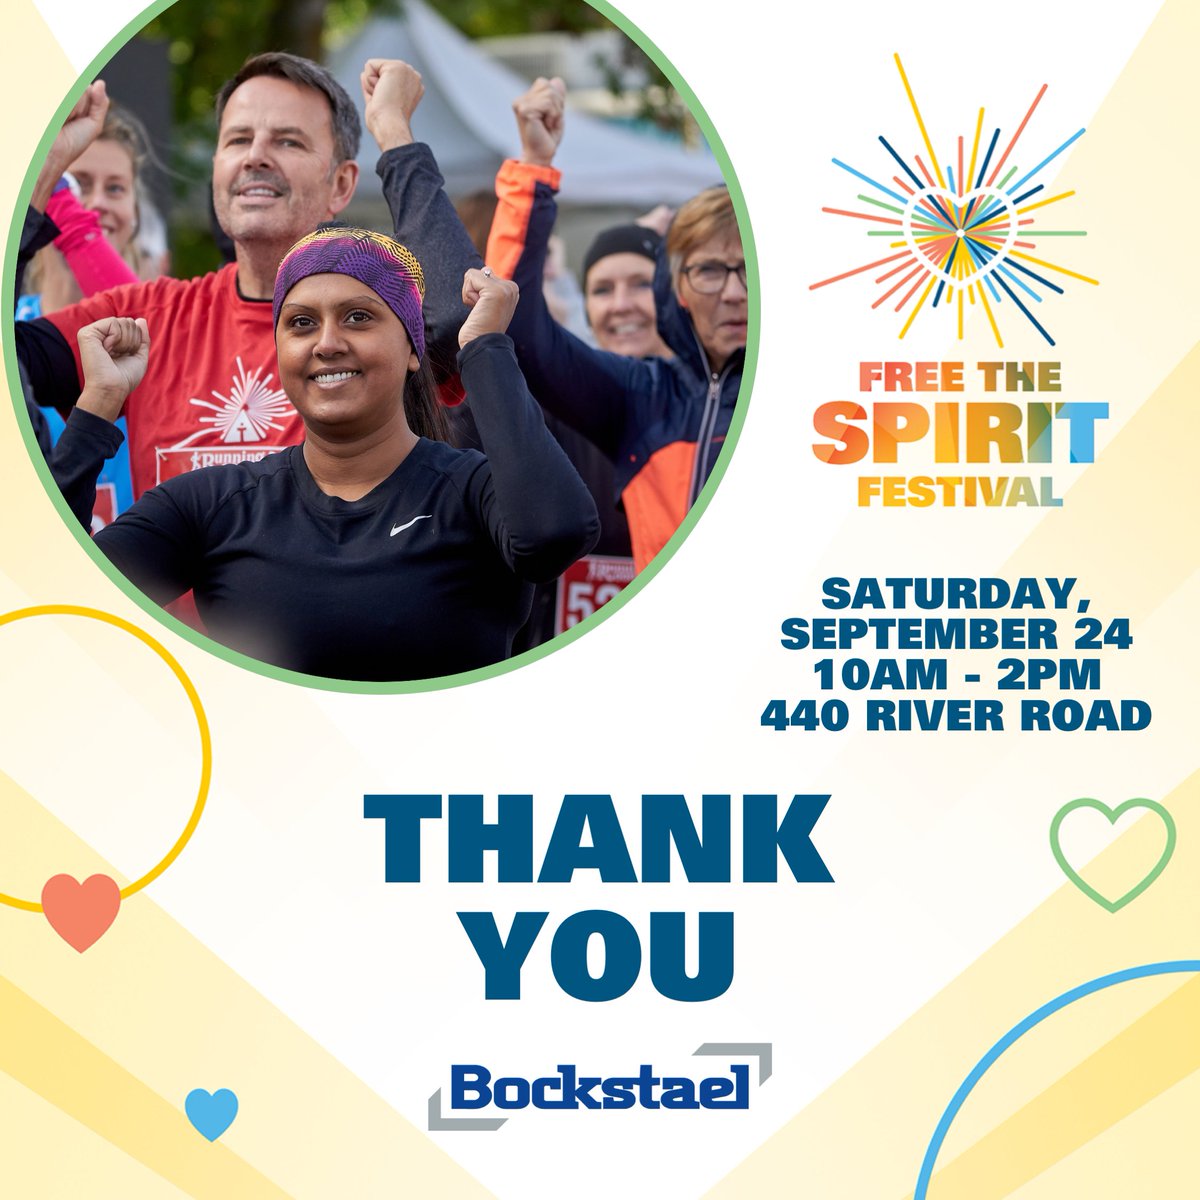 Running, walking, or rolling at the Free The Spirit Festival this Saturday? Join us at 10:40 a.m. for the Welcoming and Warm Up, at the @BockstaelCon Stage! The Warm Up is open to everybody! Be prepared to have fun! freethespiritfestival.ca/about/schedule/